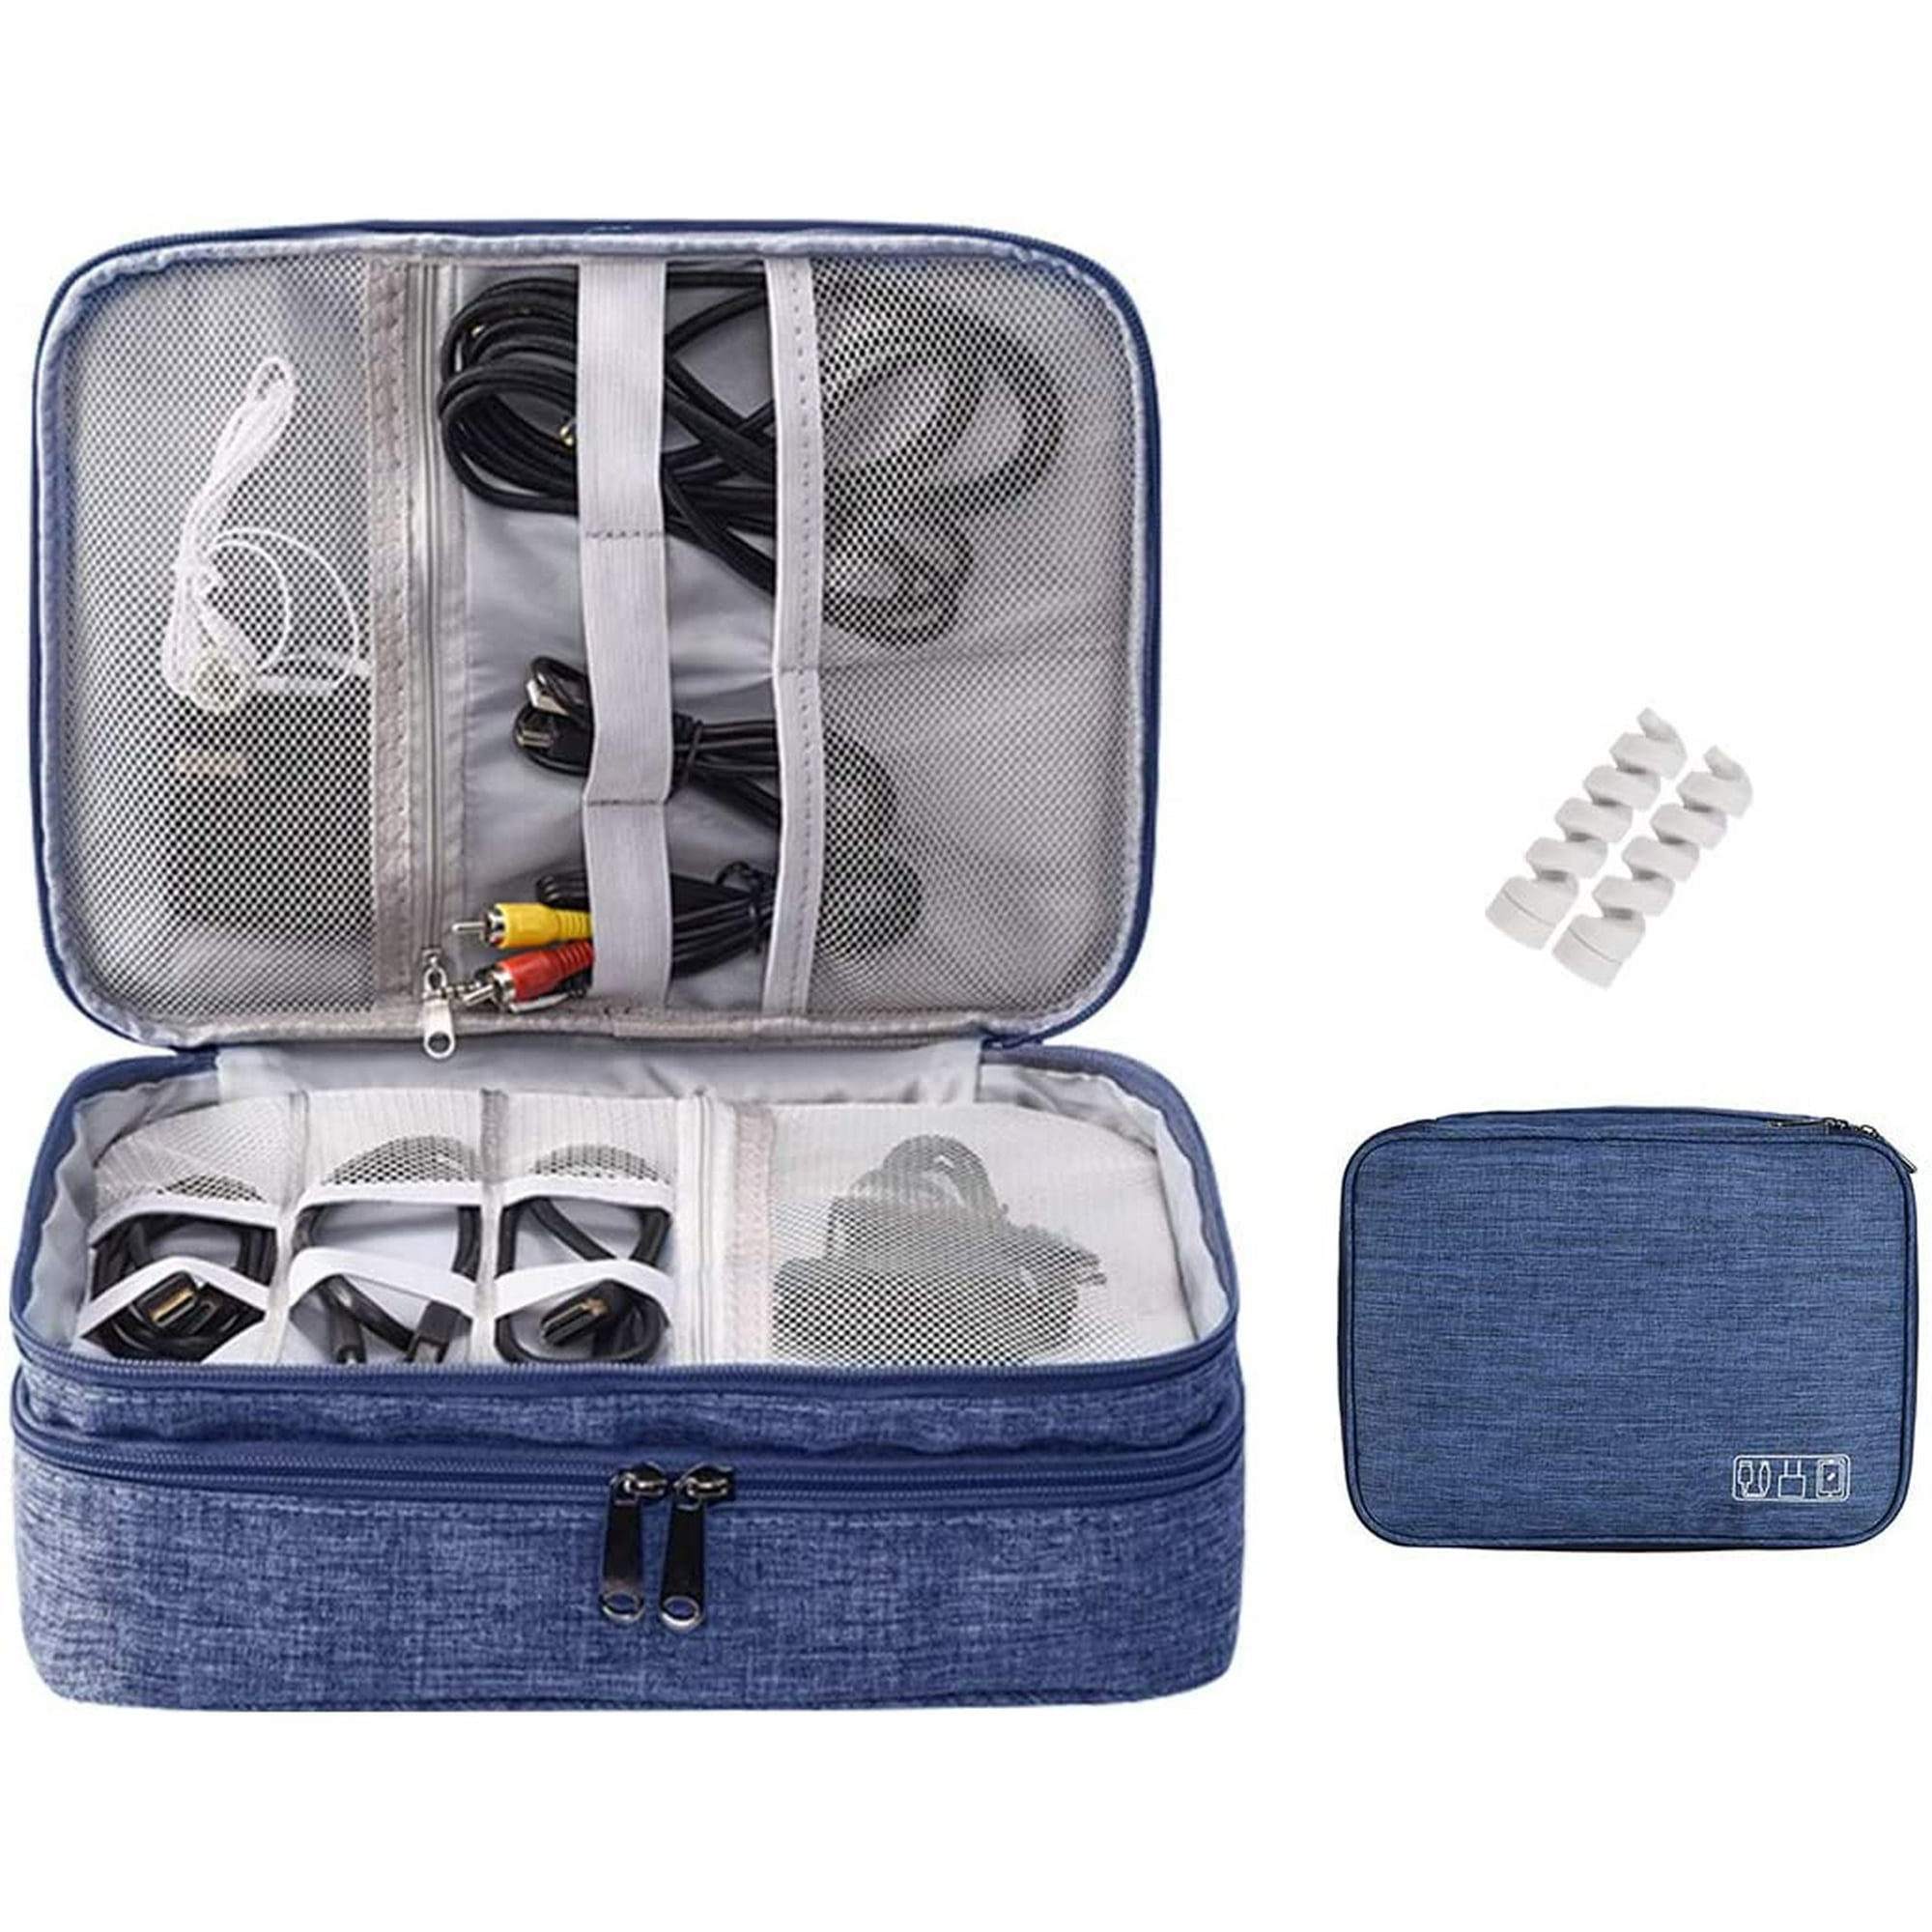 Electronics Organizer, OrgaWise Electronic Accessories Bag Travel Cable  Organizer Three-Layer for iP…See more Electronics Organizer, OrgaWise